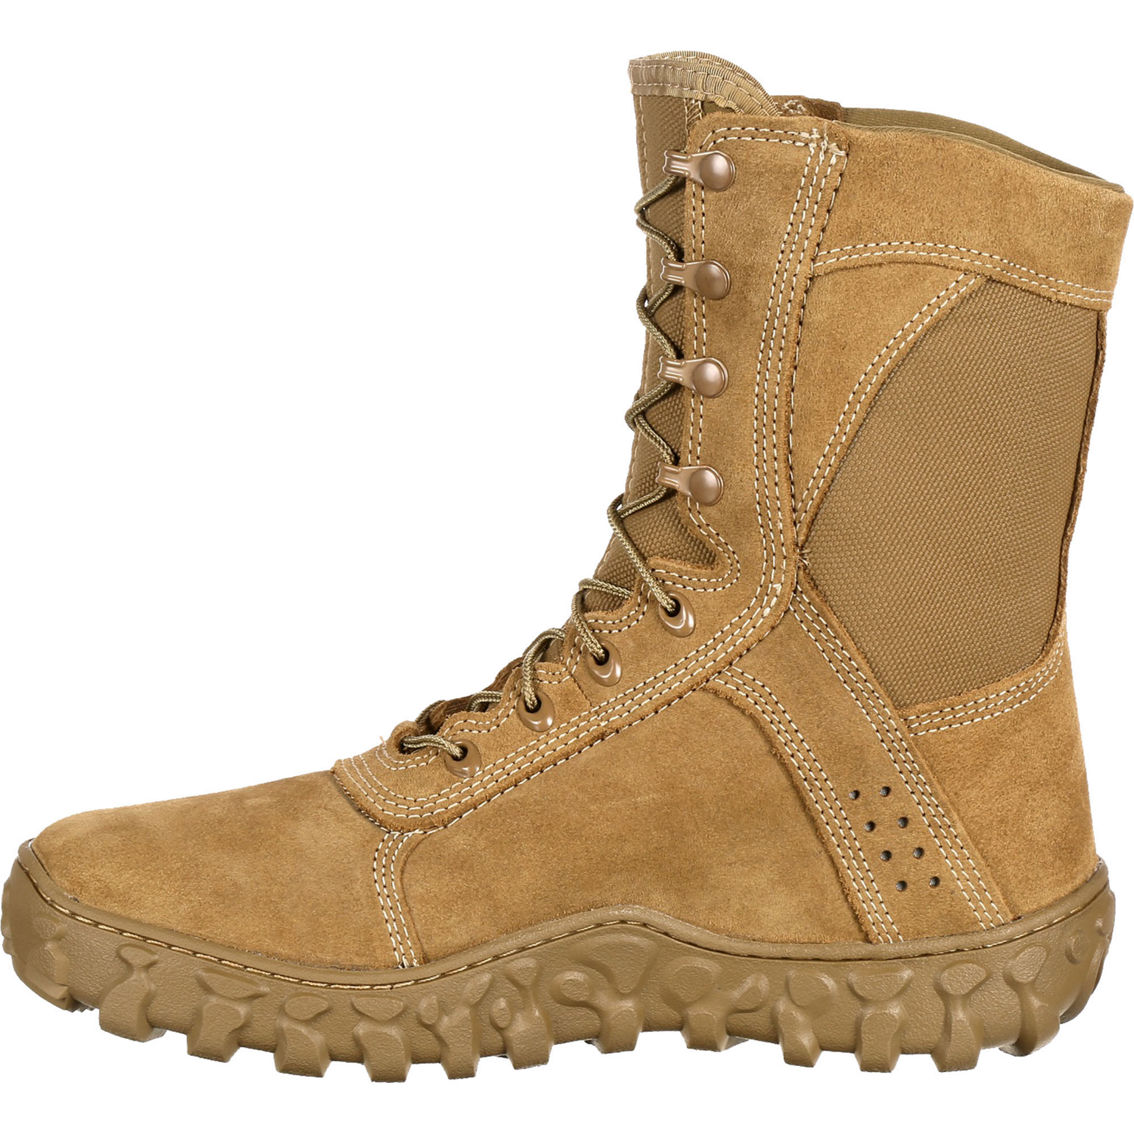 Rocky Coyote RKC050 Tactical Military Boots - Image 2 of 5